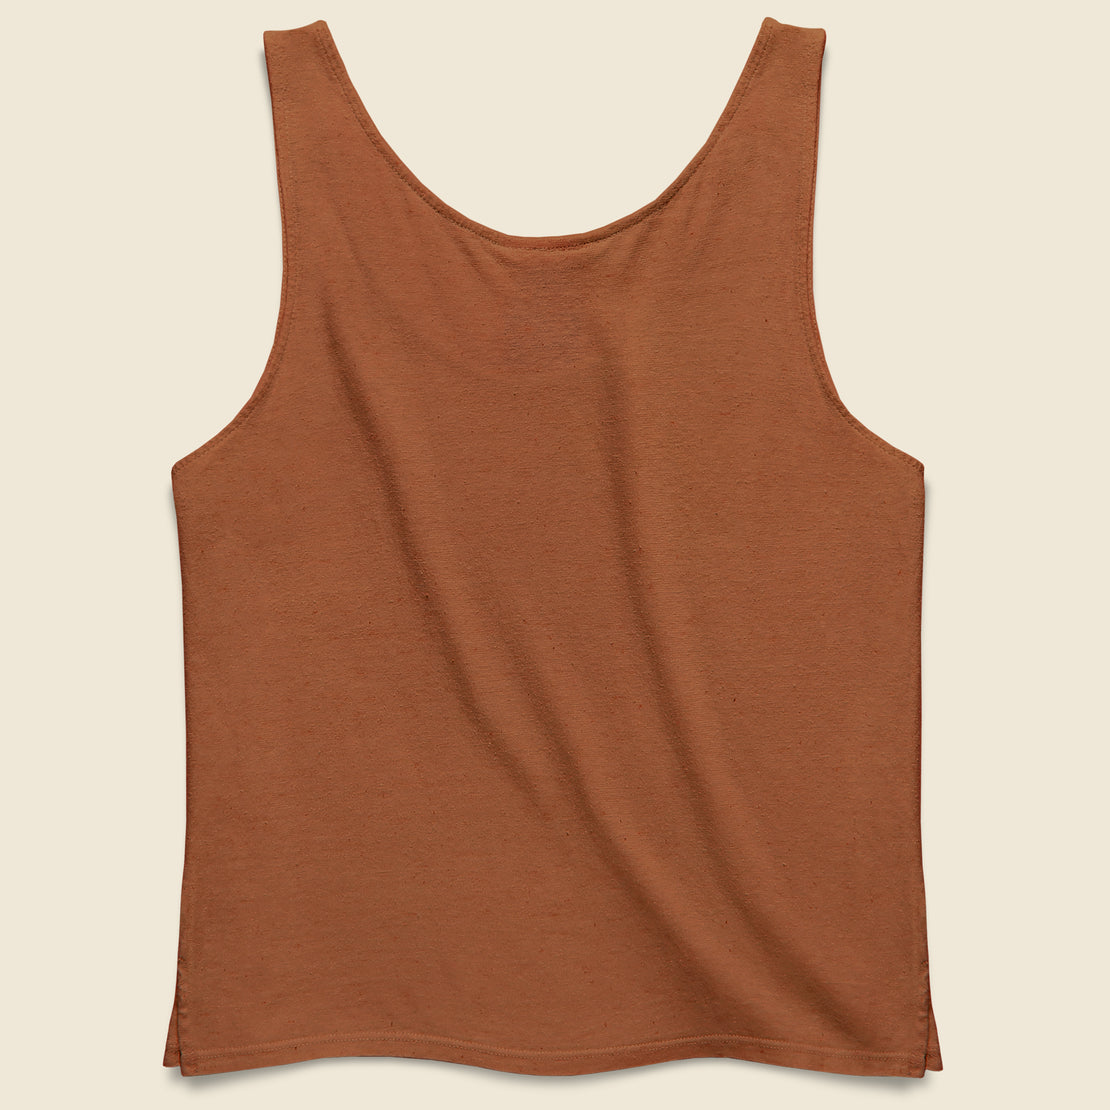 Cropped Tank - Terracotta - Jungmaven - STAG Provisions - W - Tops - Sleeveless